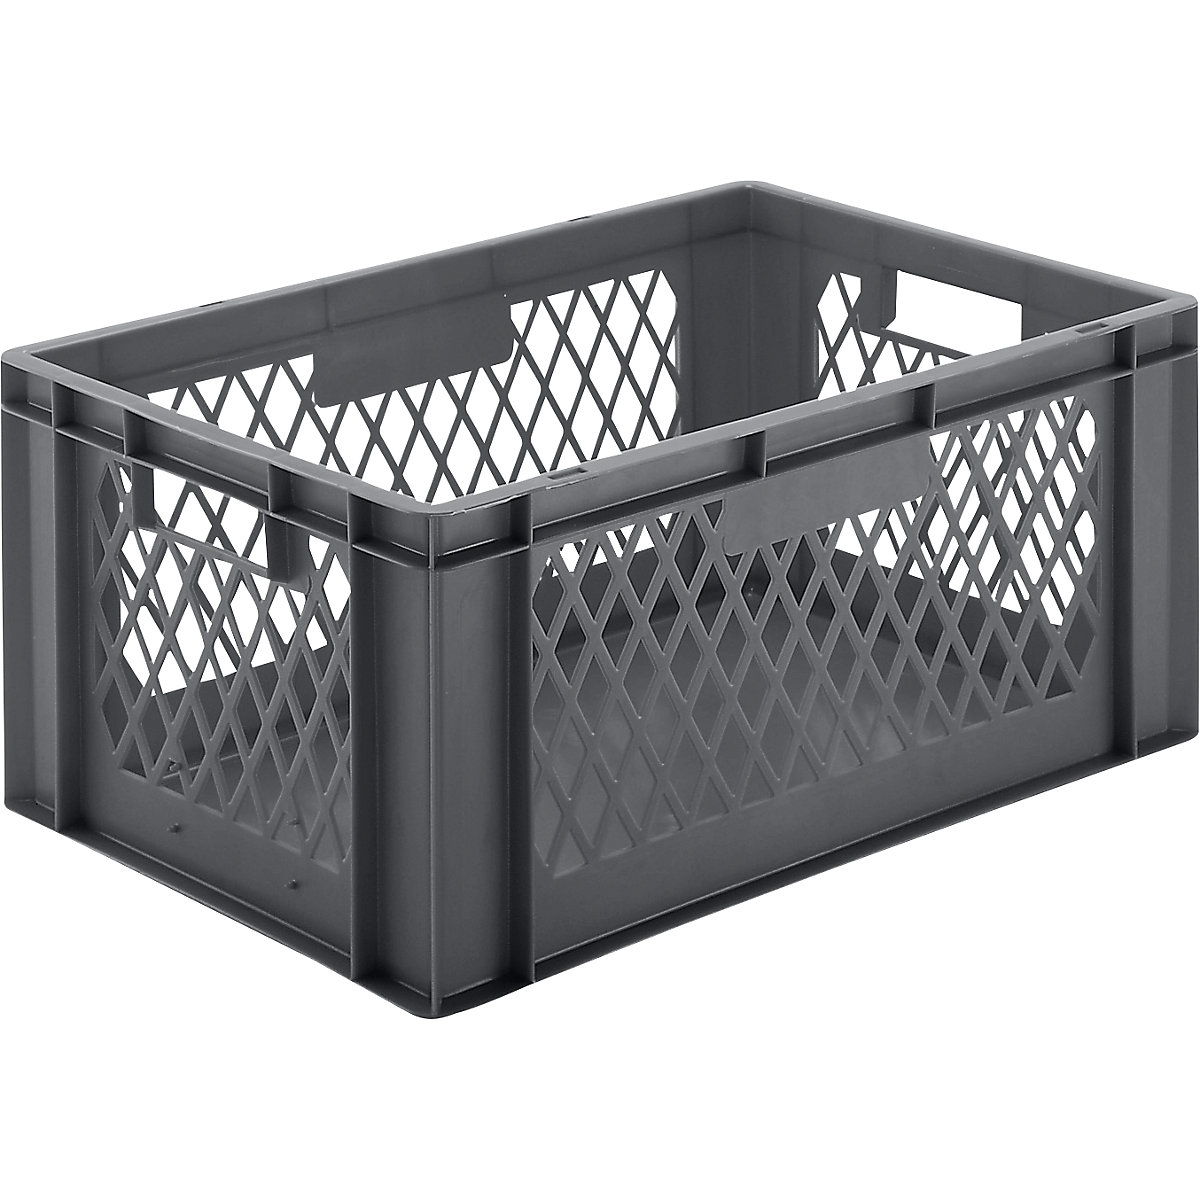 Euro stacking container, perforated walls, closed base, LxWxH 600 x 400 x 270 mm, grey, pack of 5-6